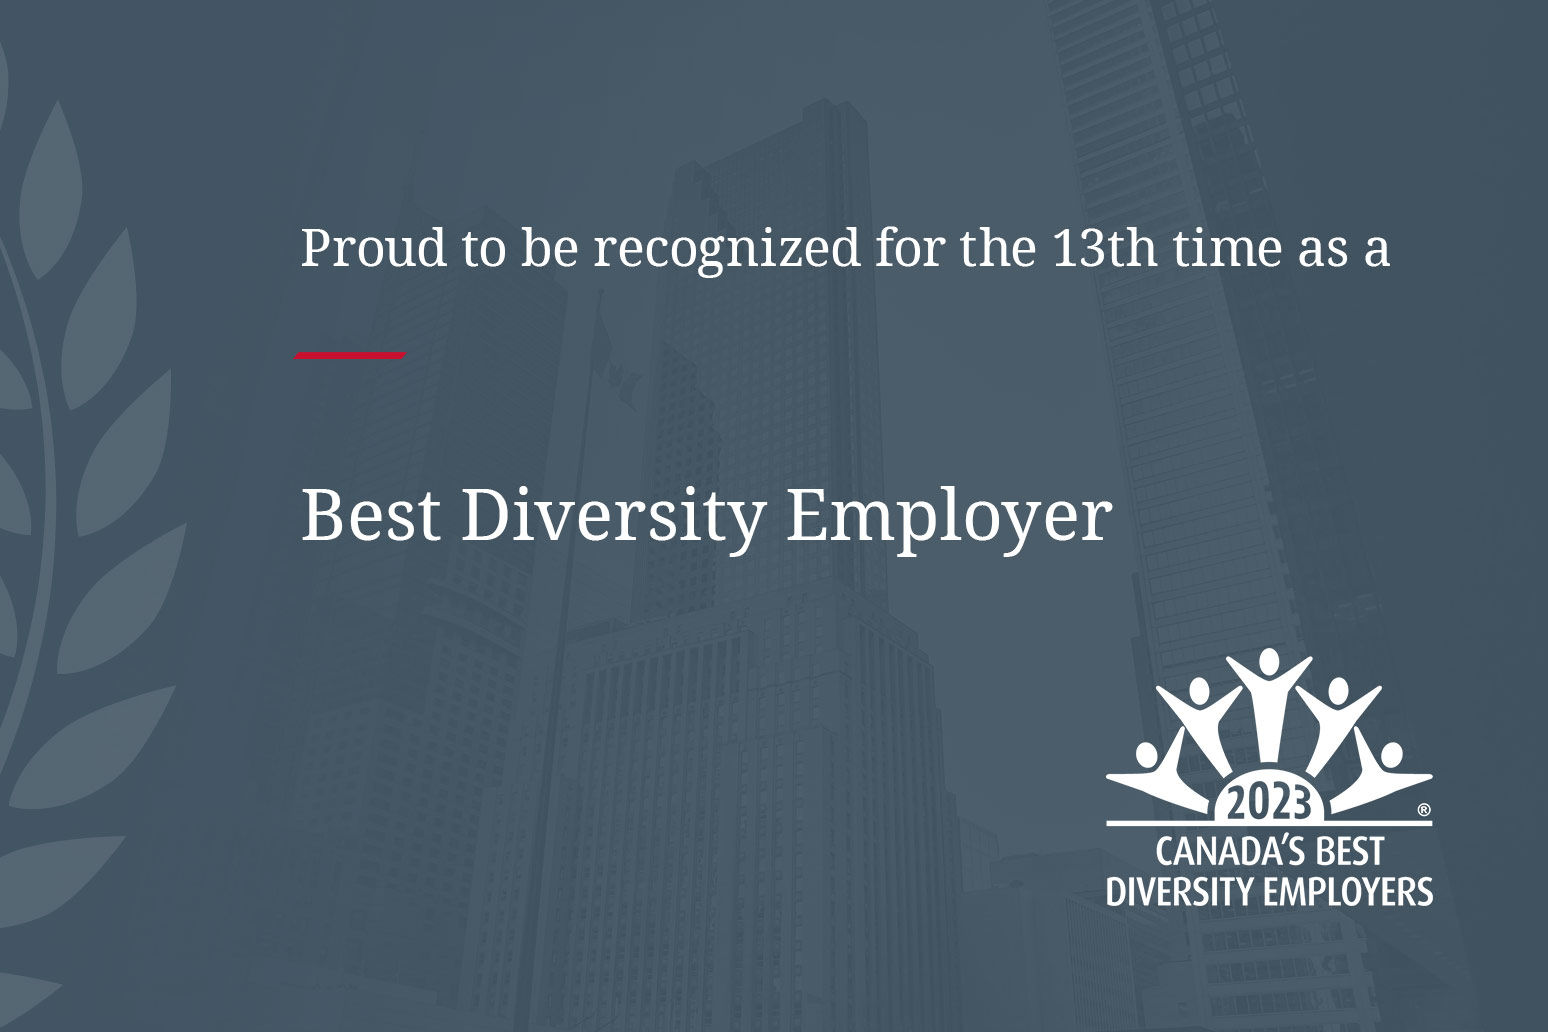 Blakes Wins Canada’s Best Diversity Employer for 13th Year